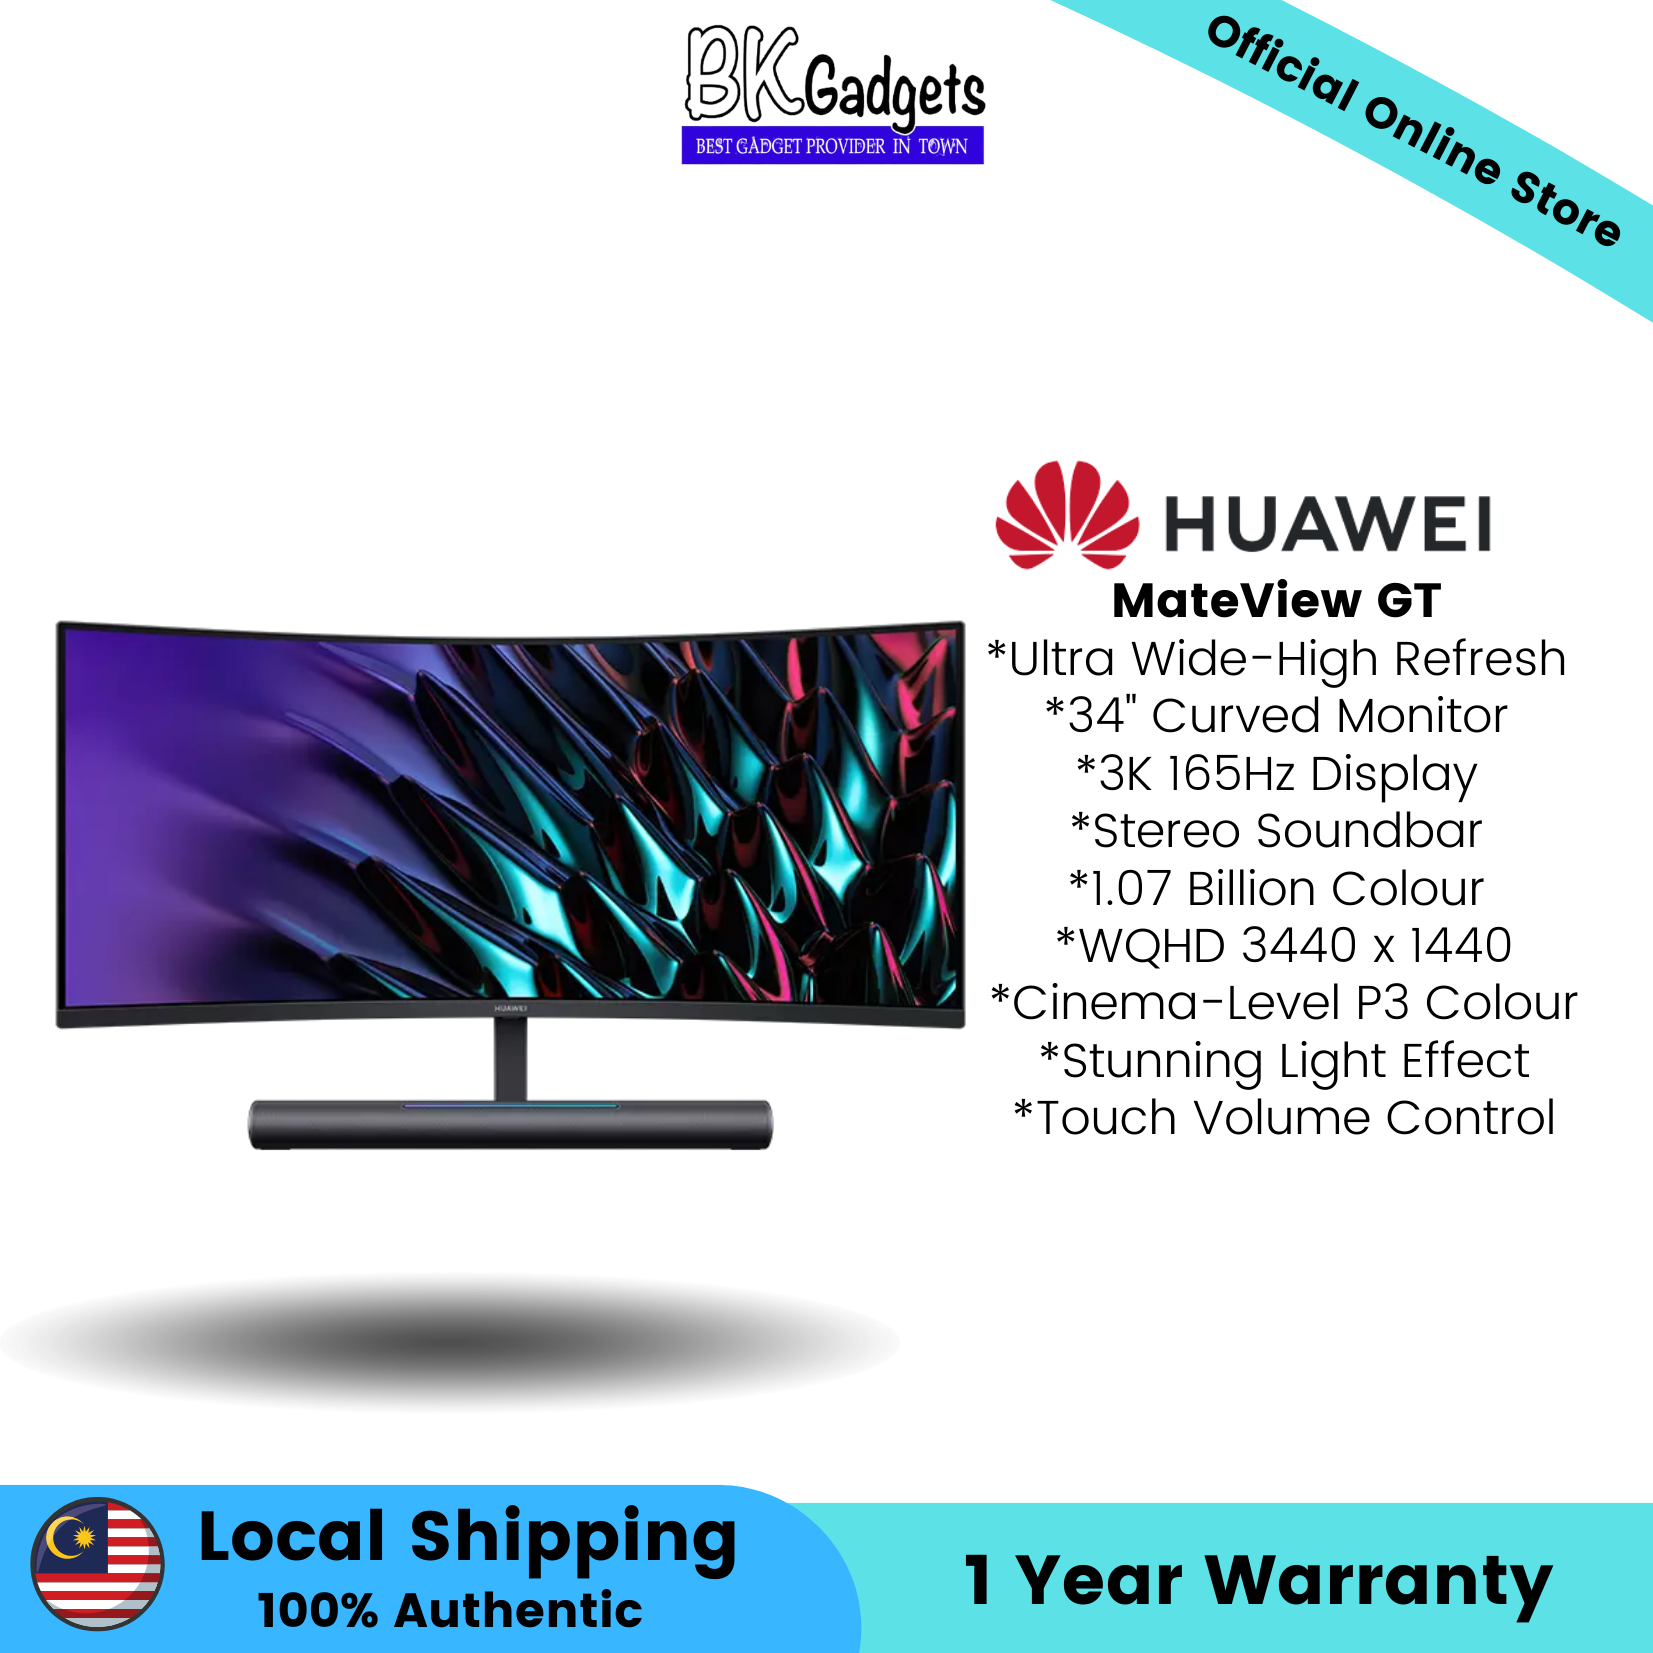 Huawei MateView GT - 34" Curved Monitor | Stereo Soundbar | Touch Volume Control